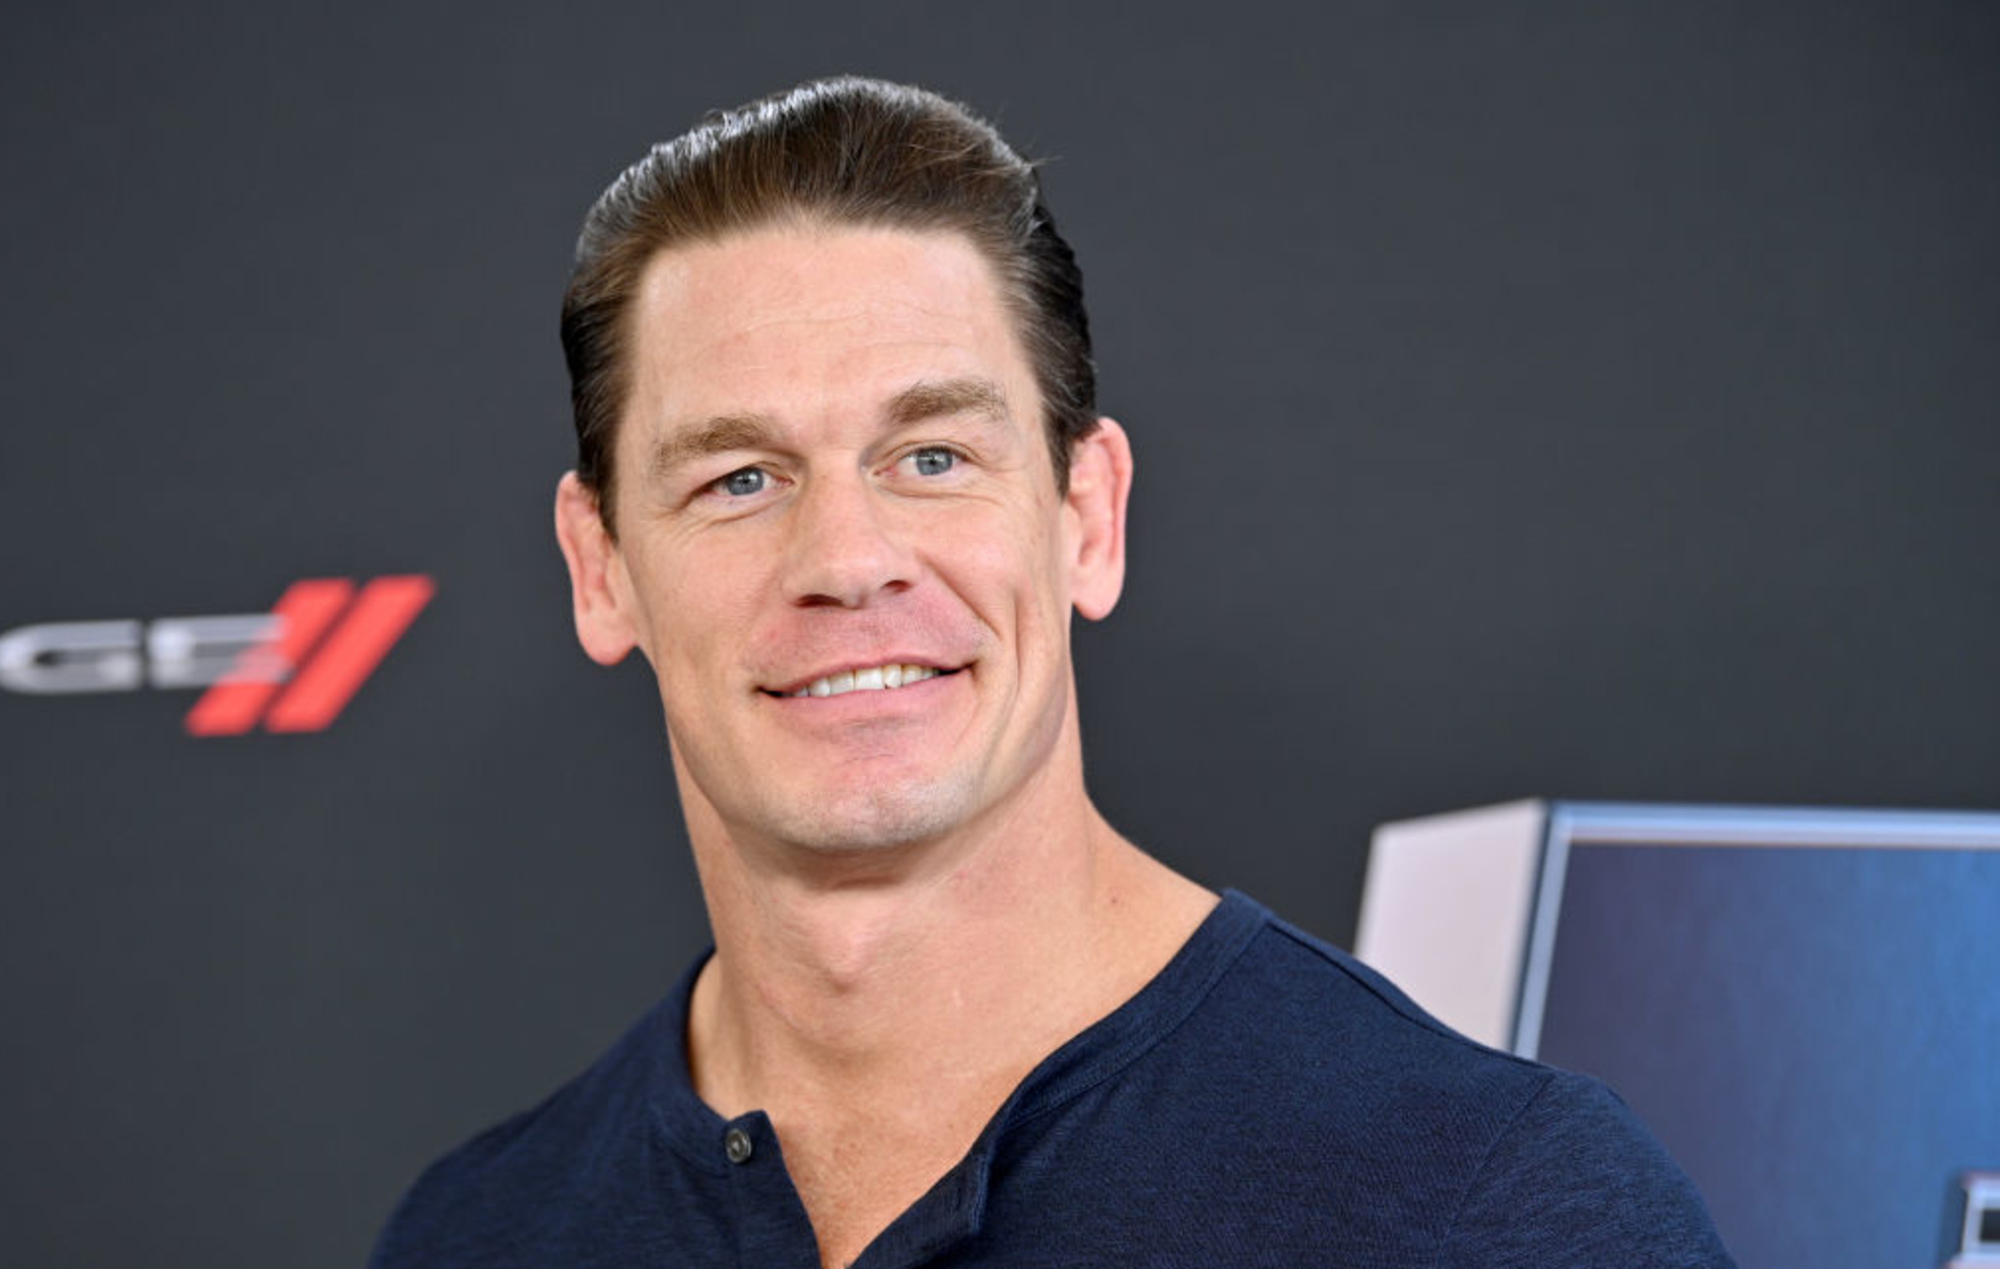 John Cena Movies List: 10 Movies Reveal About An Increasingly Interesting Actor